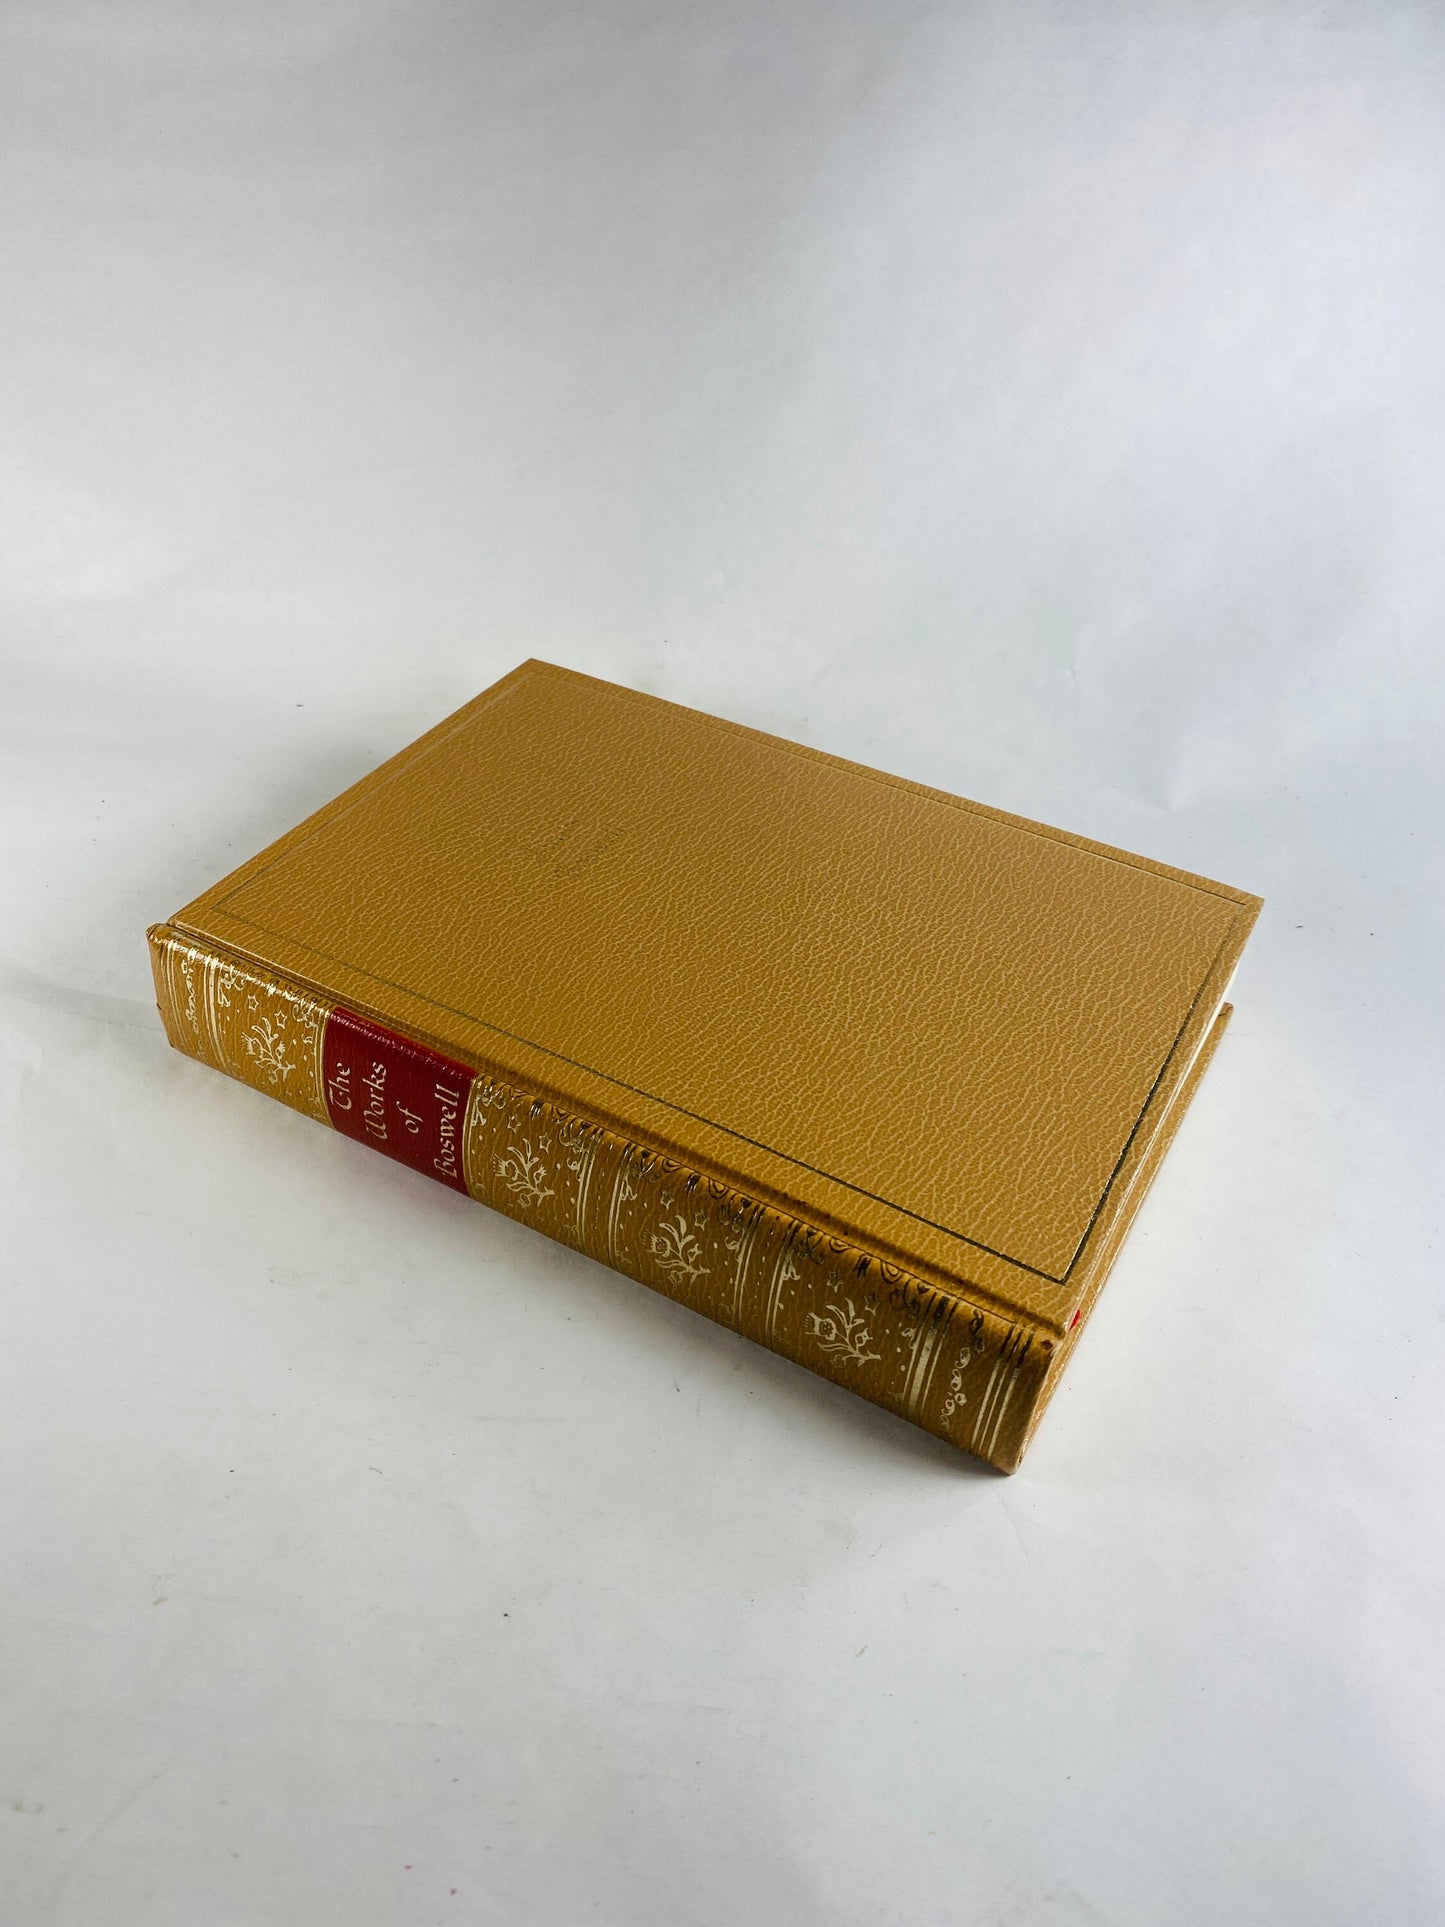 1952 Samuel Johnson biography by James Boswell vintage book, the first biography of its kind about the dictionary author